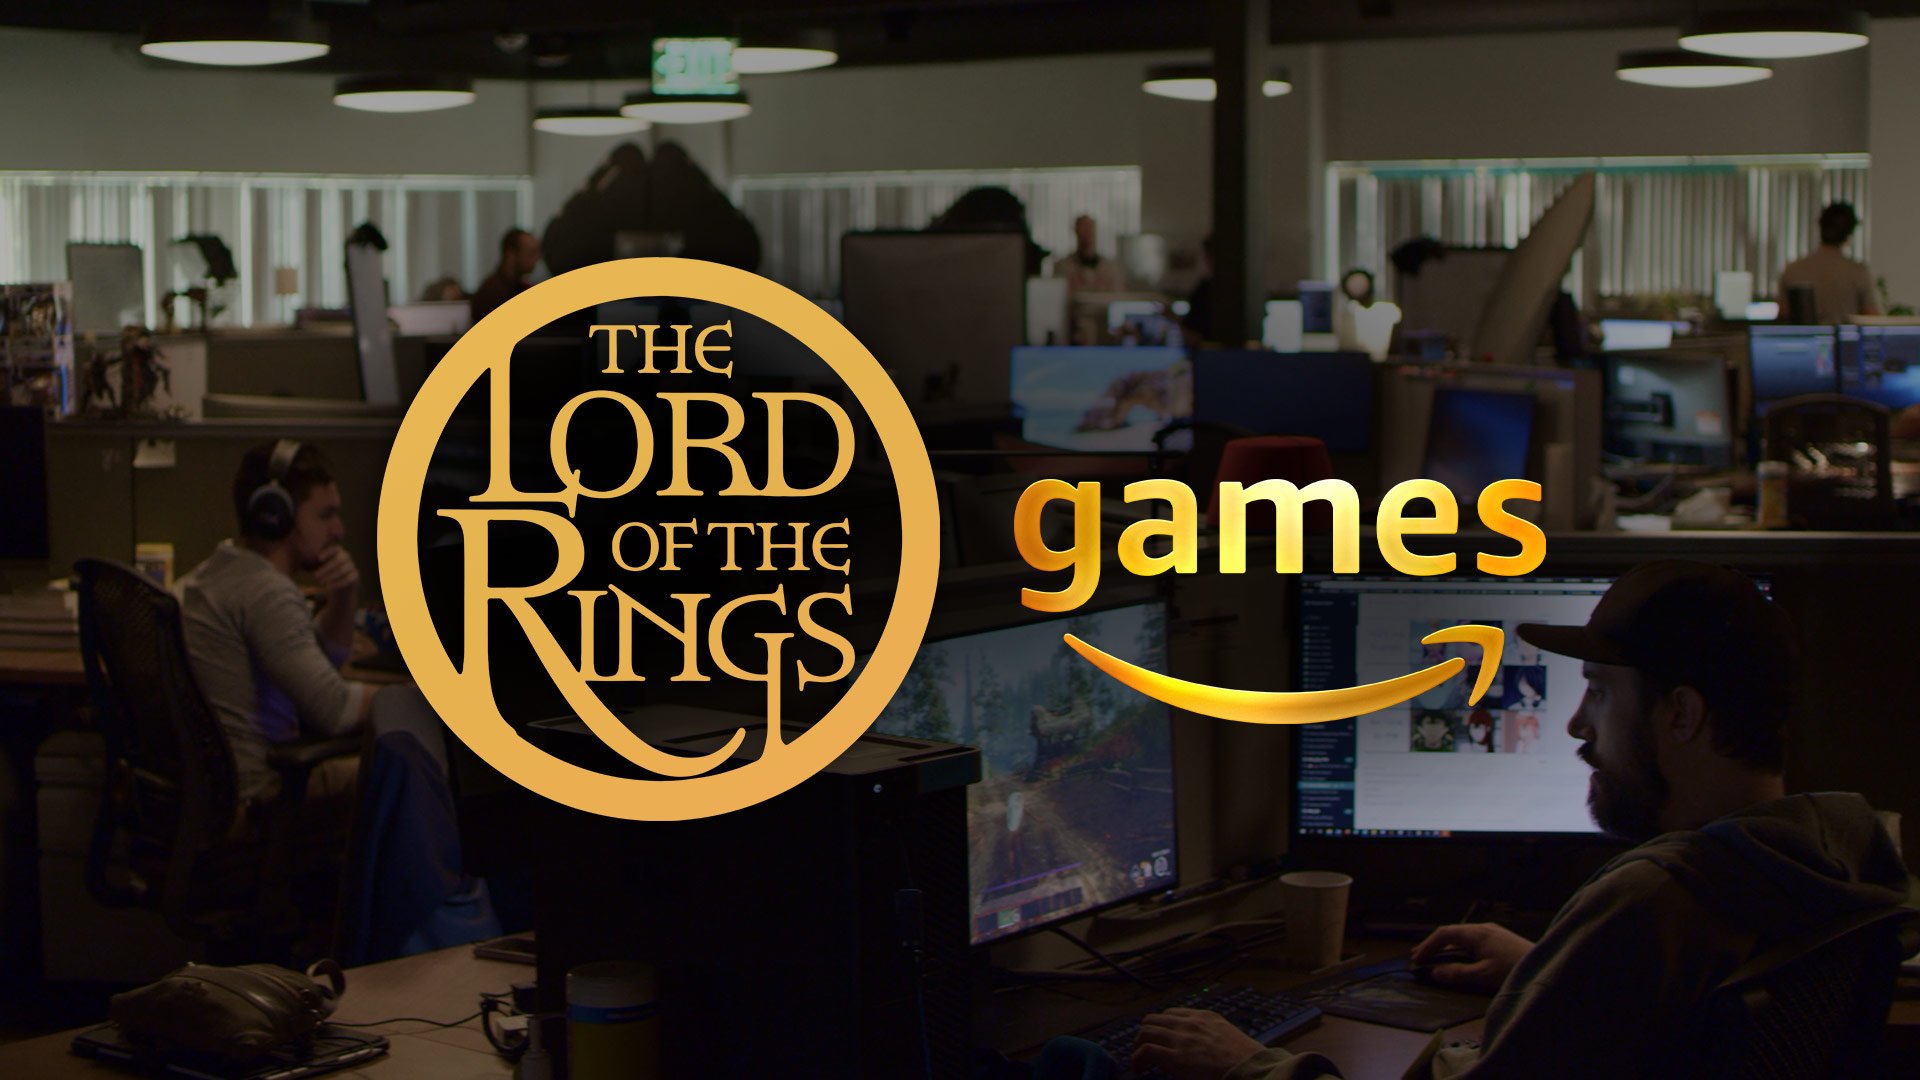 #
      Amazon Games announces The Lord of the Rings MMO for console, PC developed by New World studio